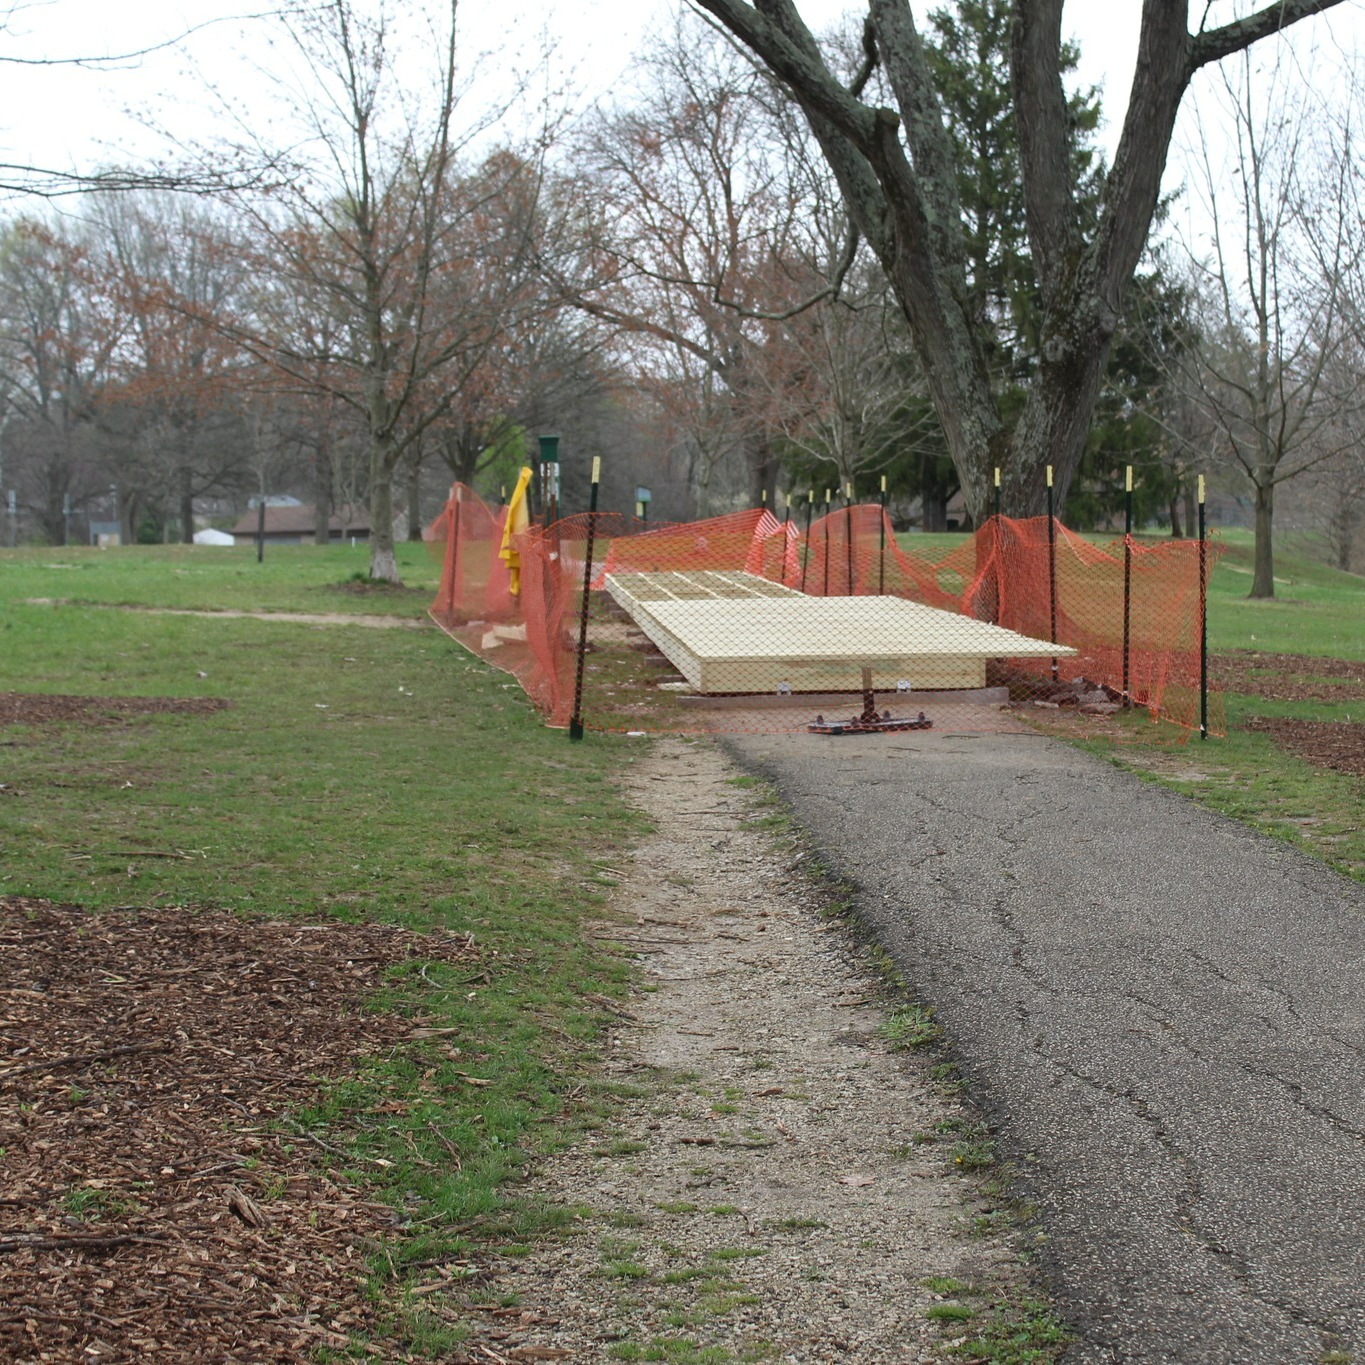 Photo of a new, elevated lumber boardwalk on the asphalt path at Bryan Park.